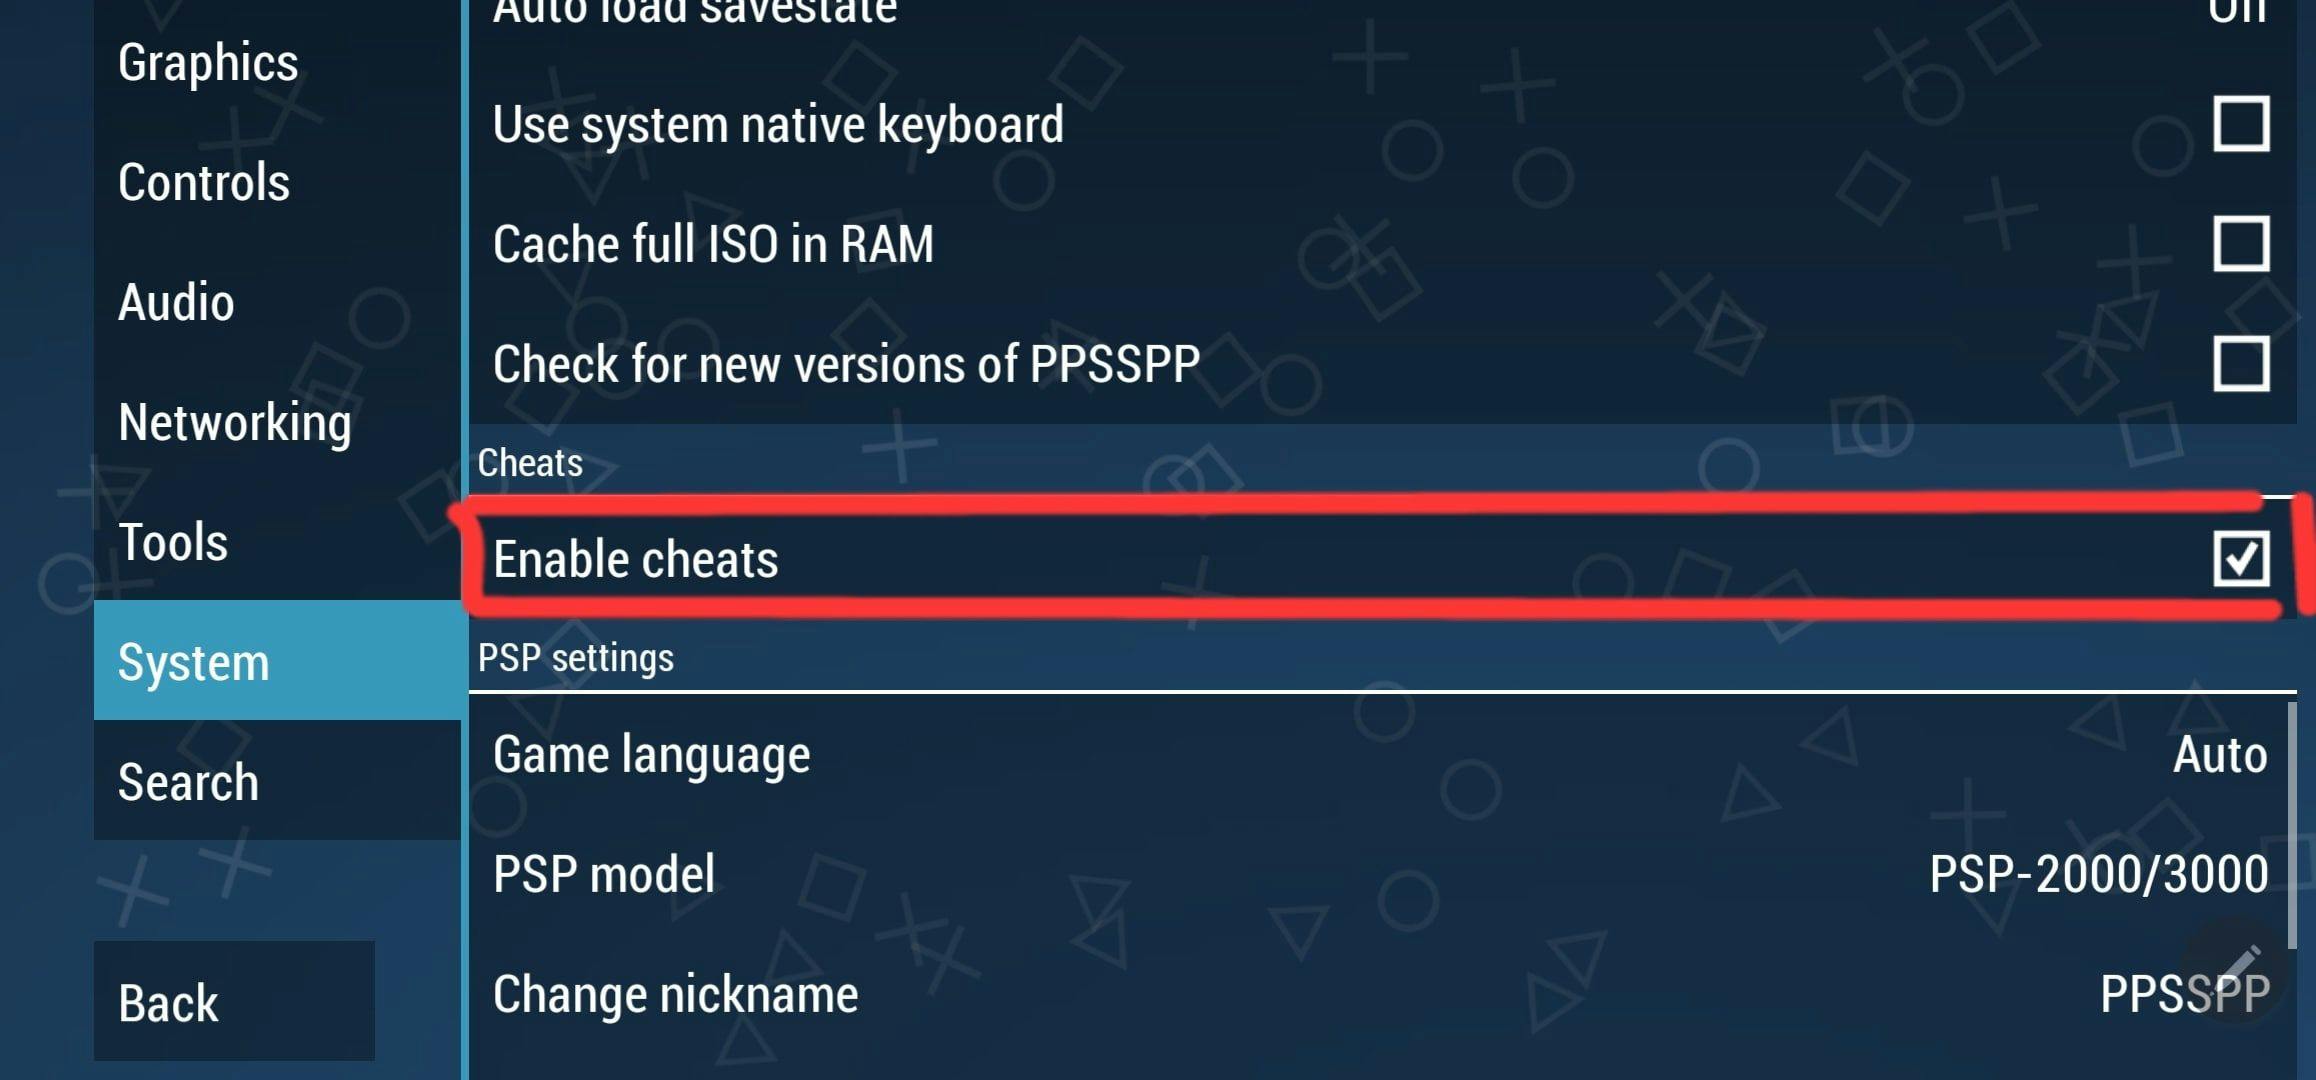 Enable the Cheat Option